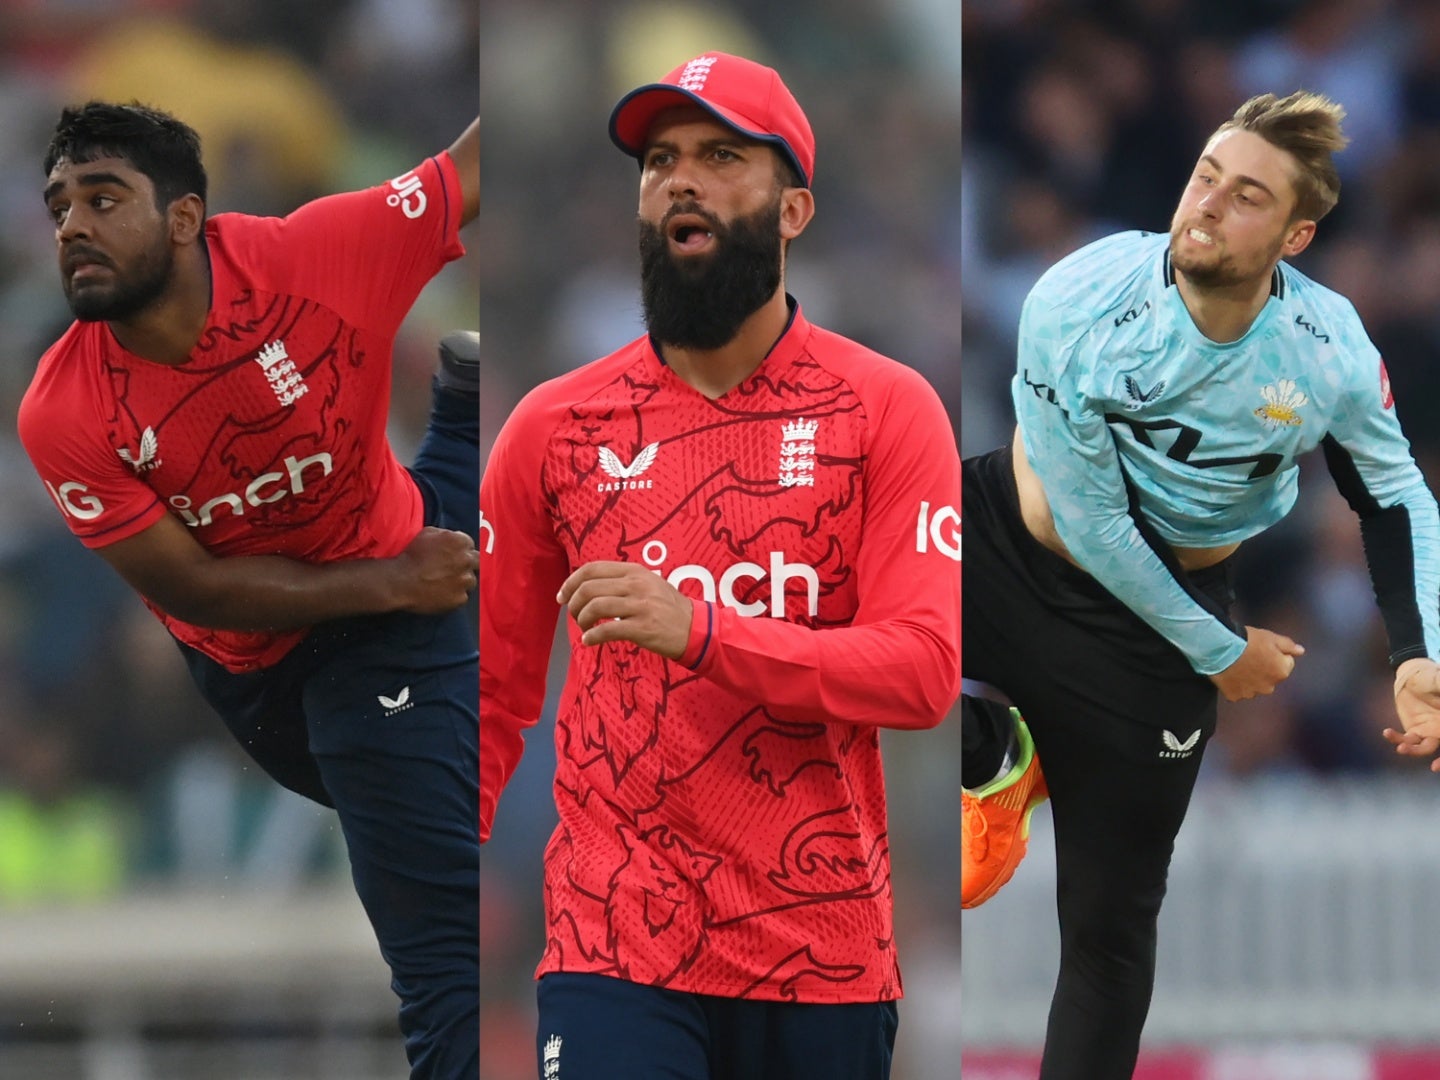 Rehan Ahmed, Moeen Ali and Will Jacks are among the options to replace Jack Leach